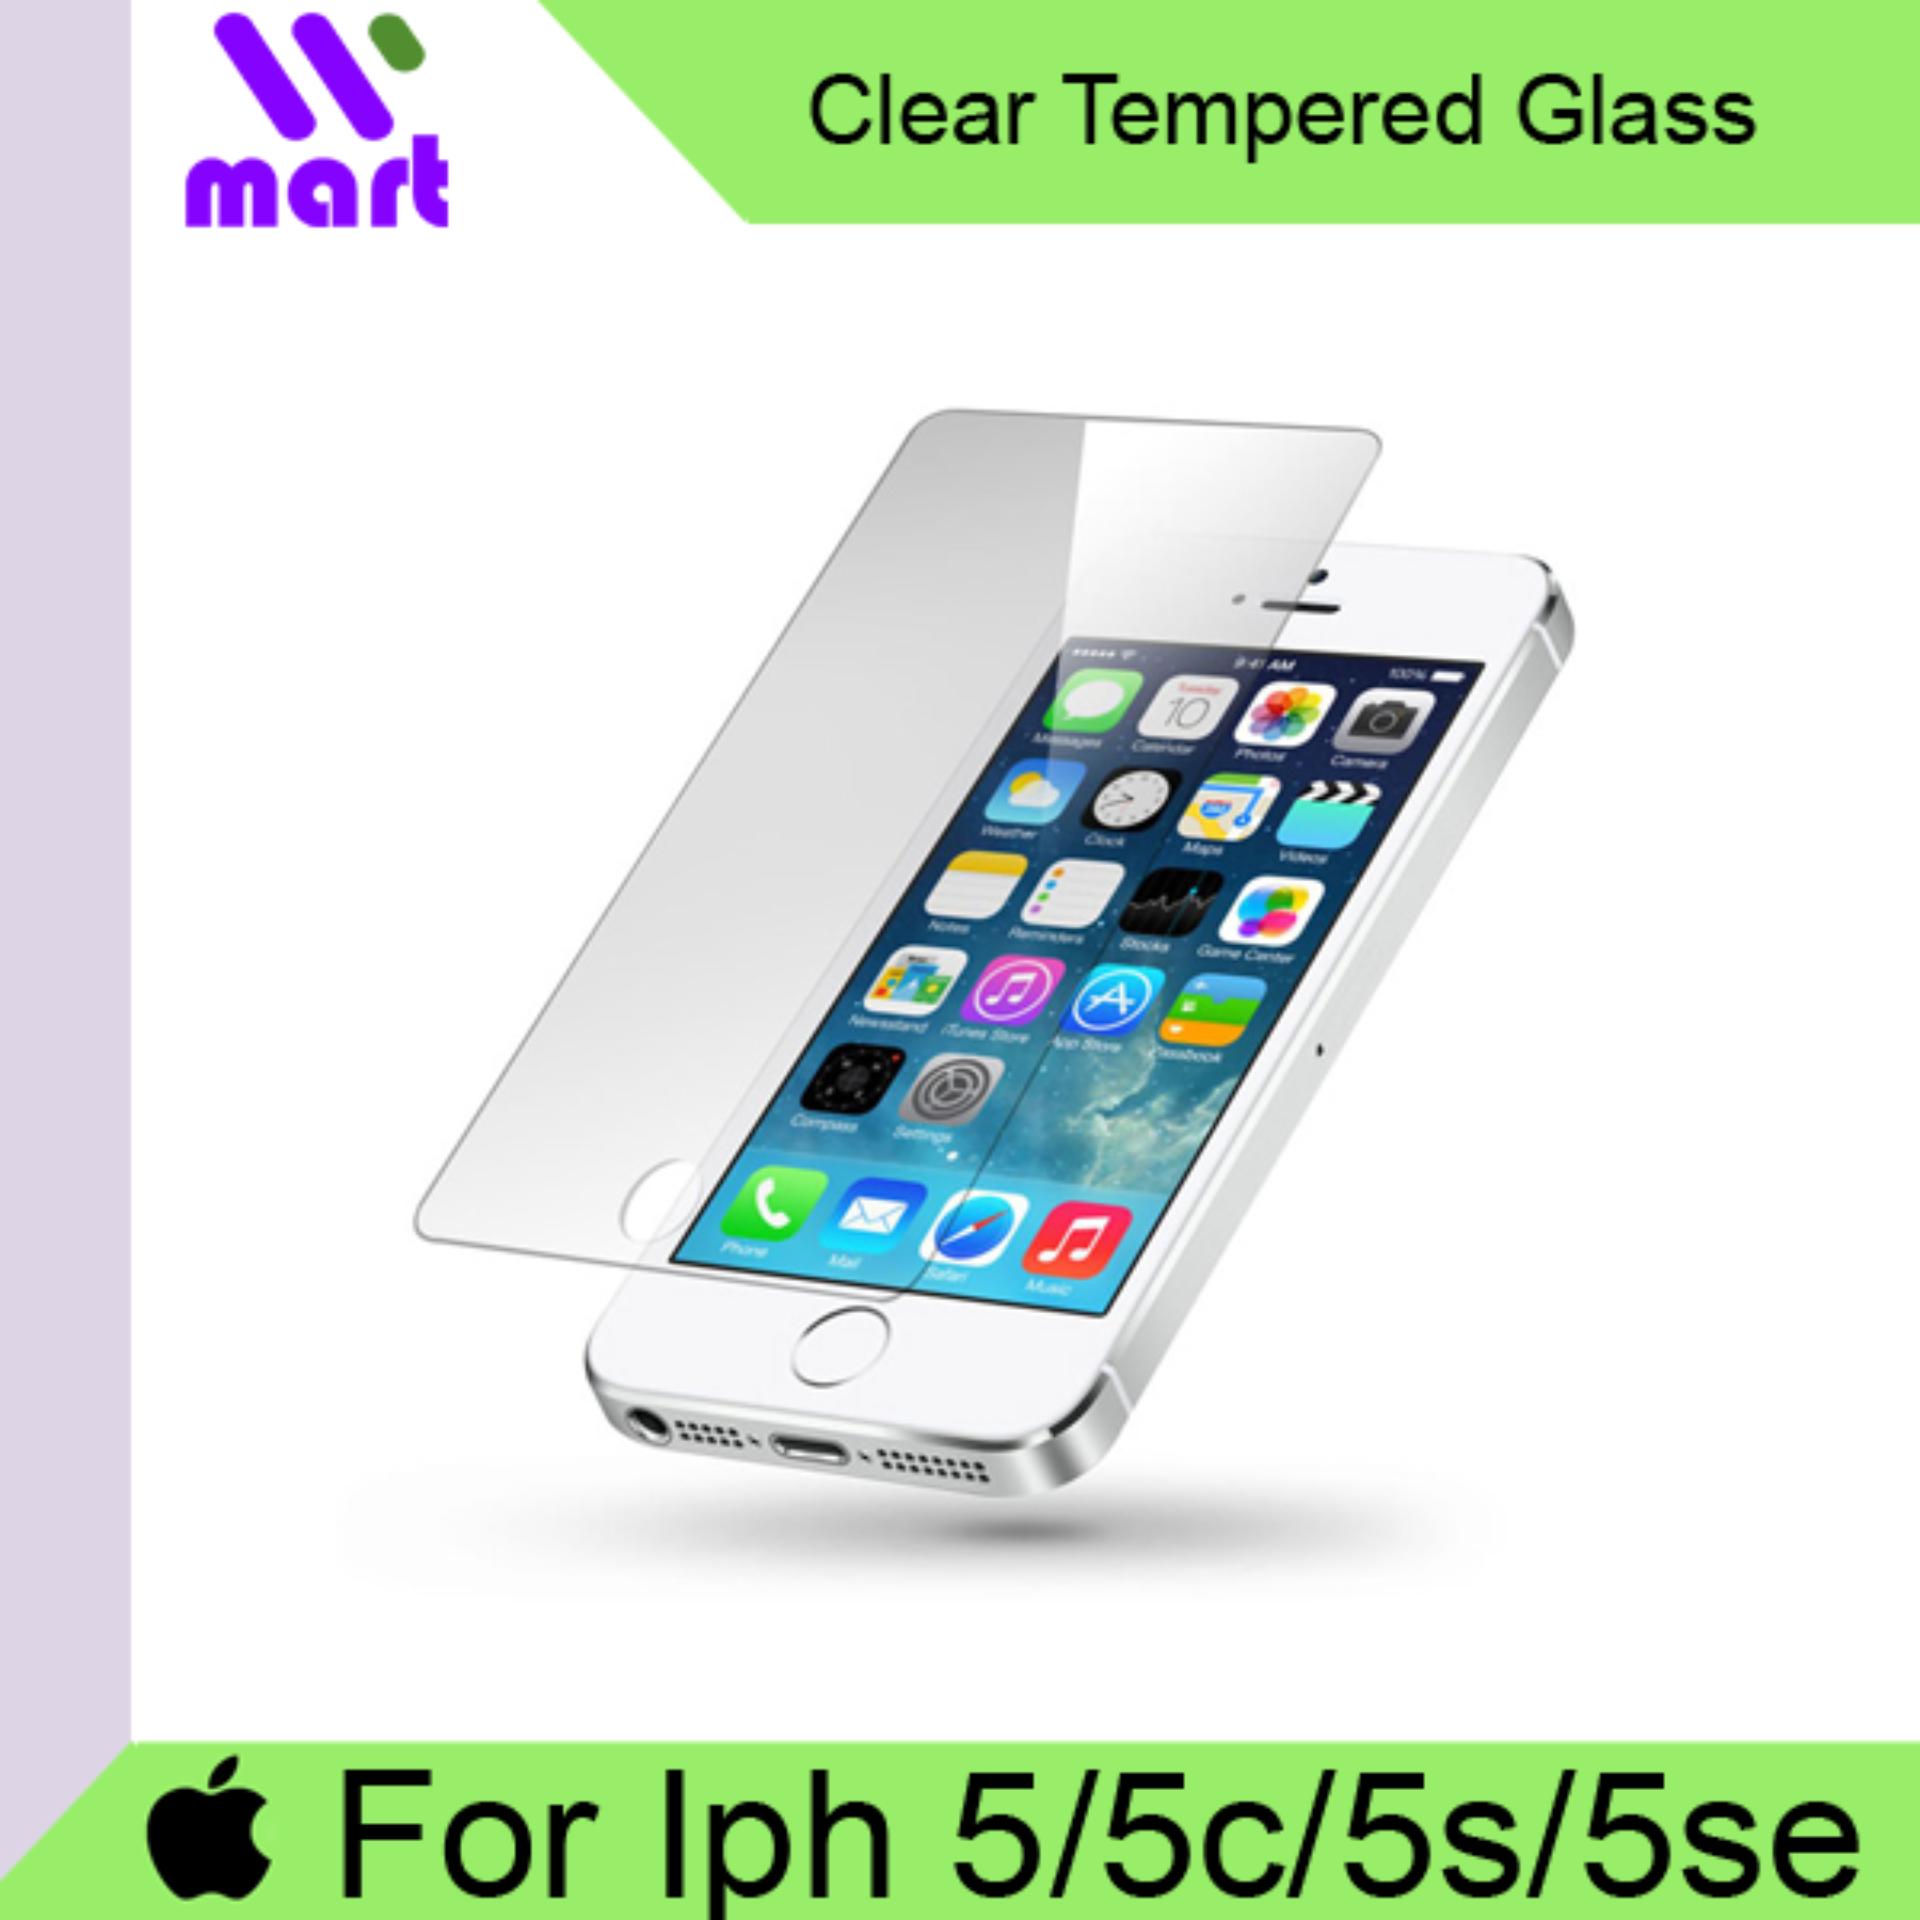 Tempered Glass Screen Protector (Clear) For Iphone 5 5c 5s 5se